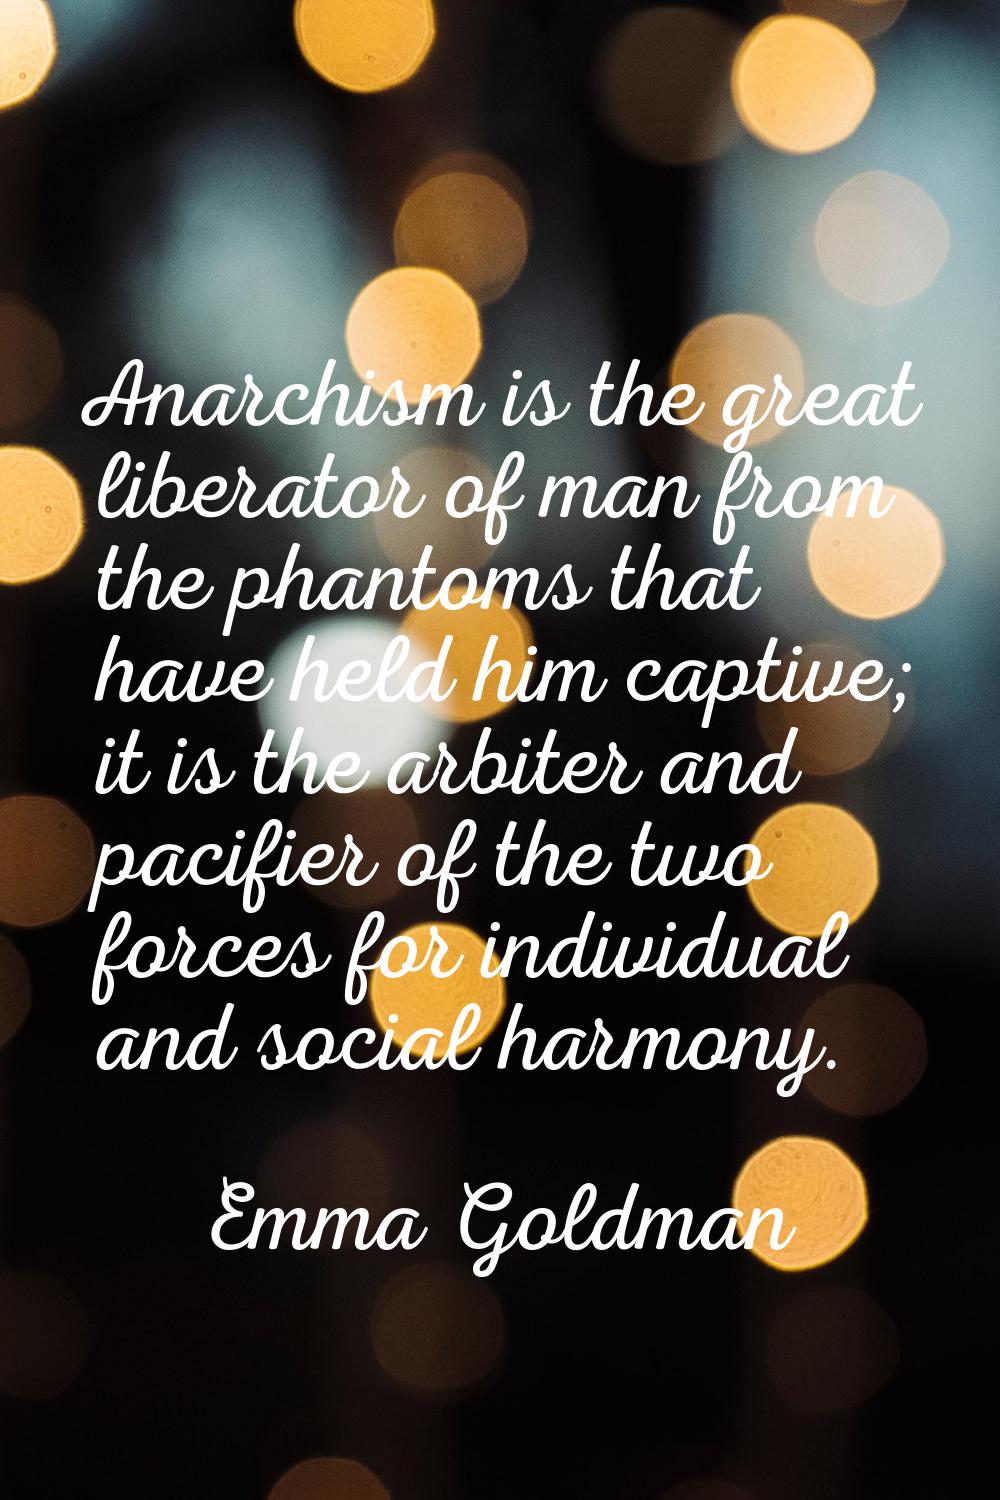 Anarchism is the great liberator of man from the phantoms that have held him captive; it is the arb